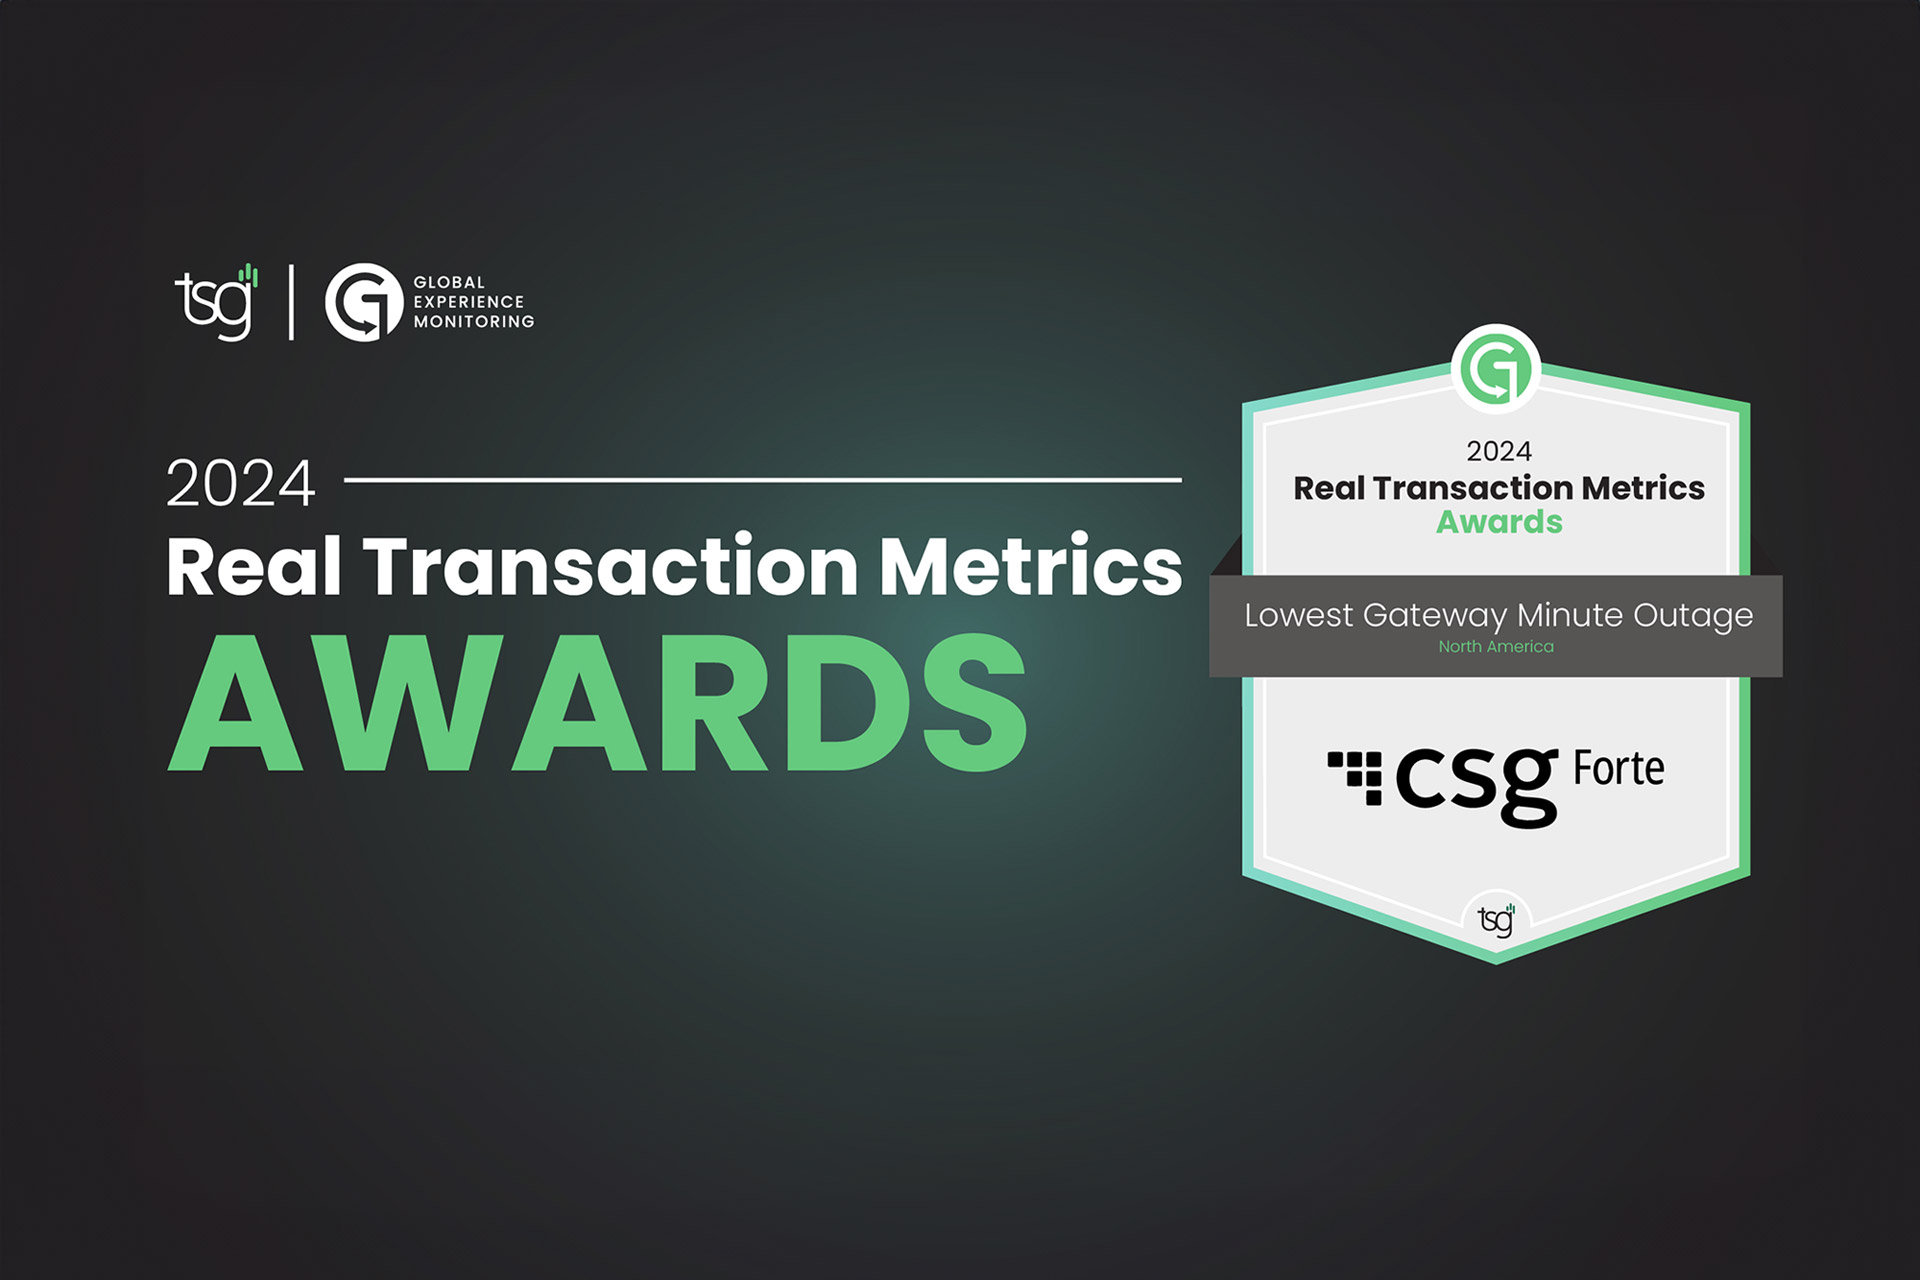 CSG Forte Honored As Top Platform For Payment Gateway Stability In TSG 2024 Real Transaction Metrics Awards